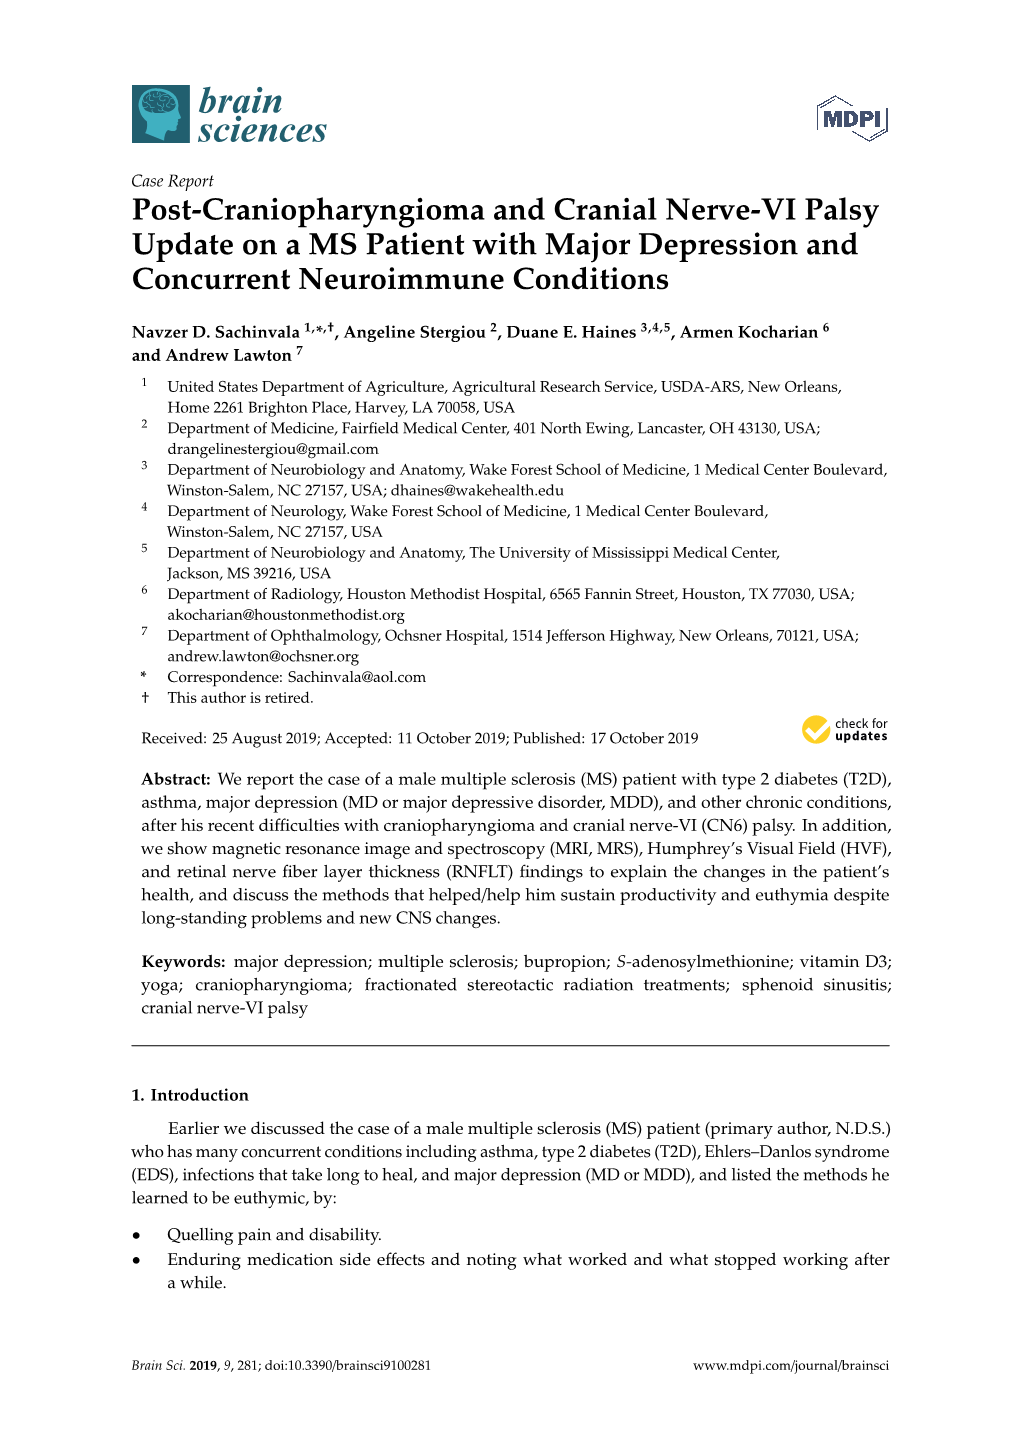 Post-Craniopharyngioma and Cranial Nerve-VI Palsy Update on a MS Patient with Major Depression and Concurrent Neuroimmune Conditions